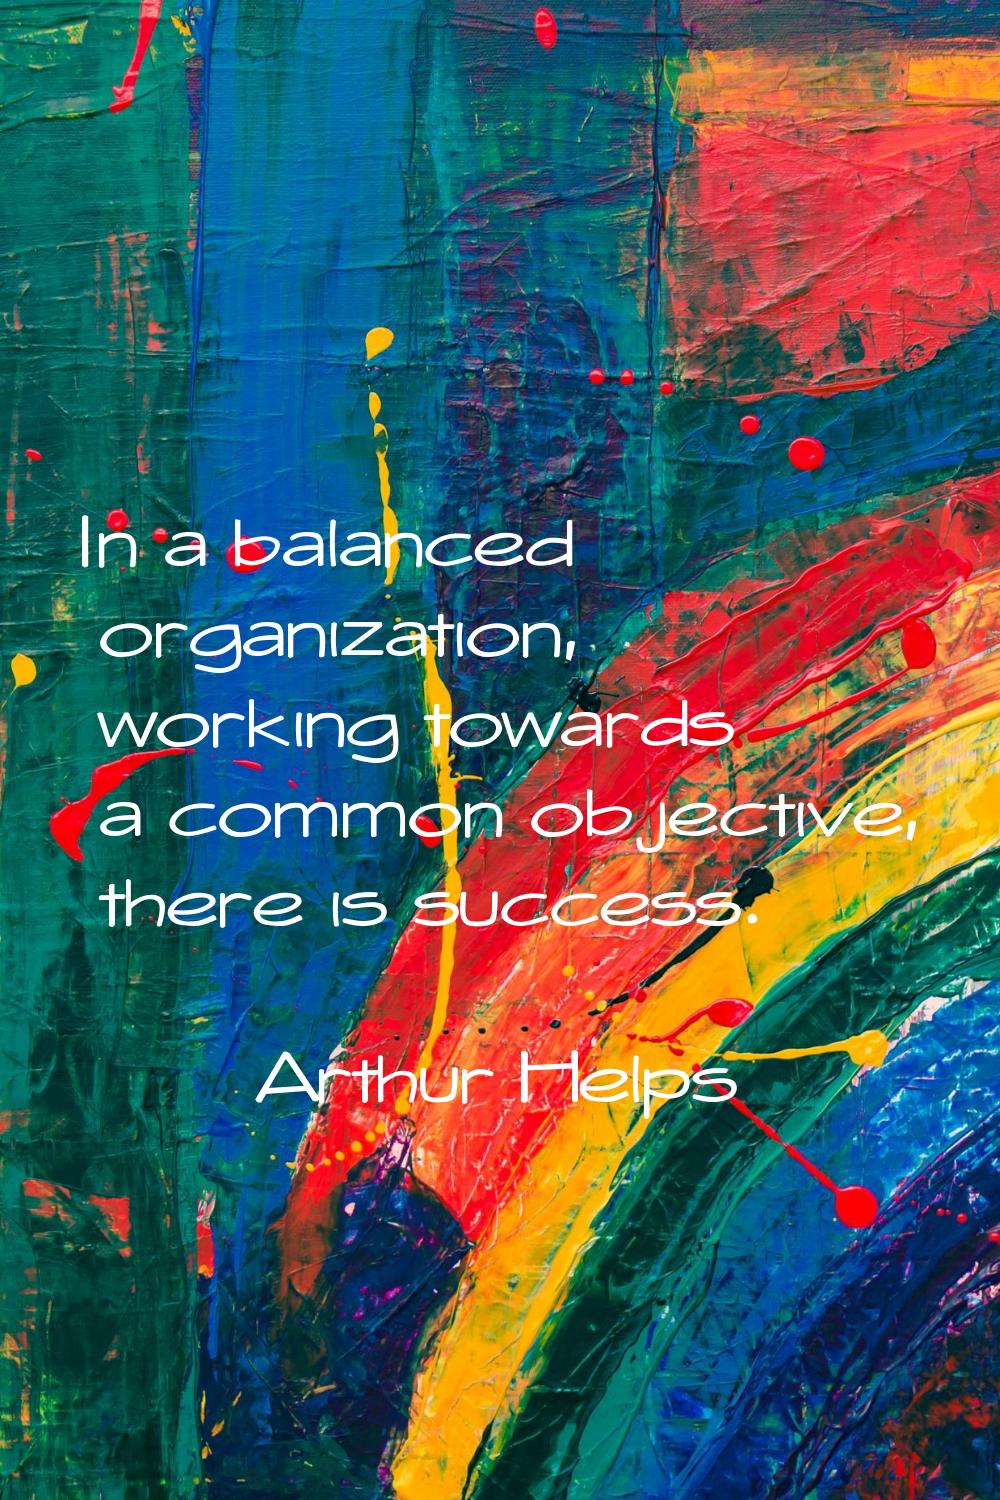 In a balanced organization, working towards a common objective, there is success.